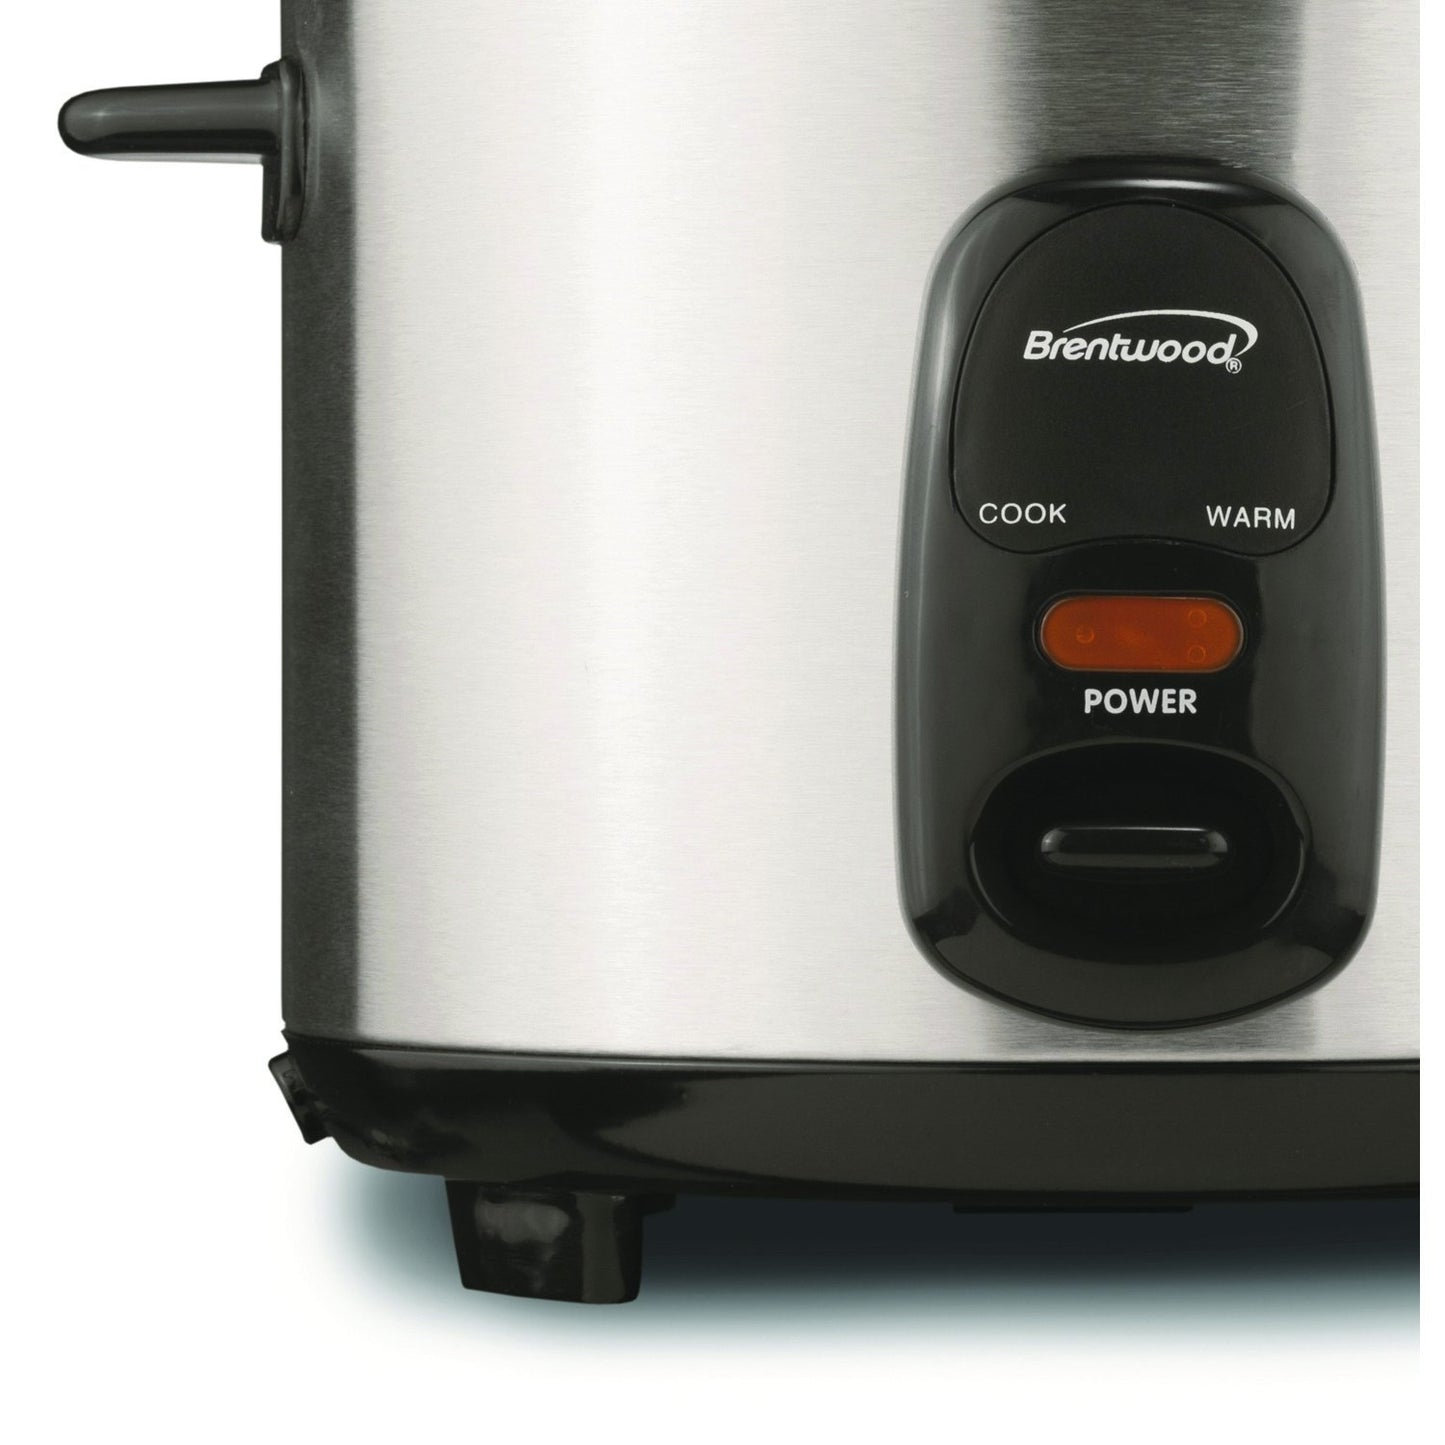 Brentwood Appl. TS-20 10-Cup Stainless Steel Rice Cooker